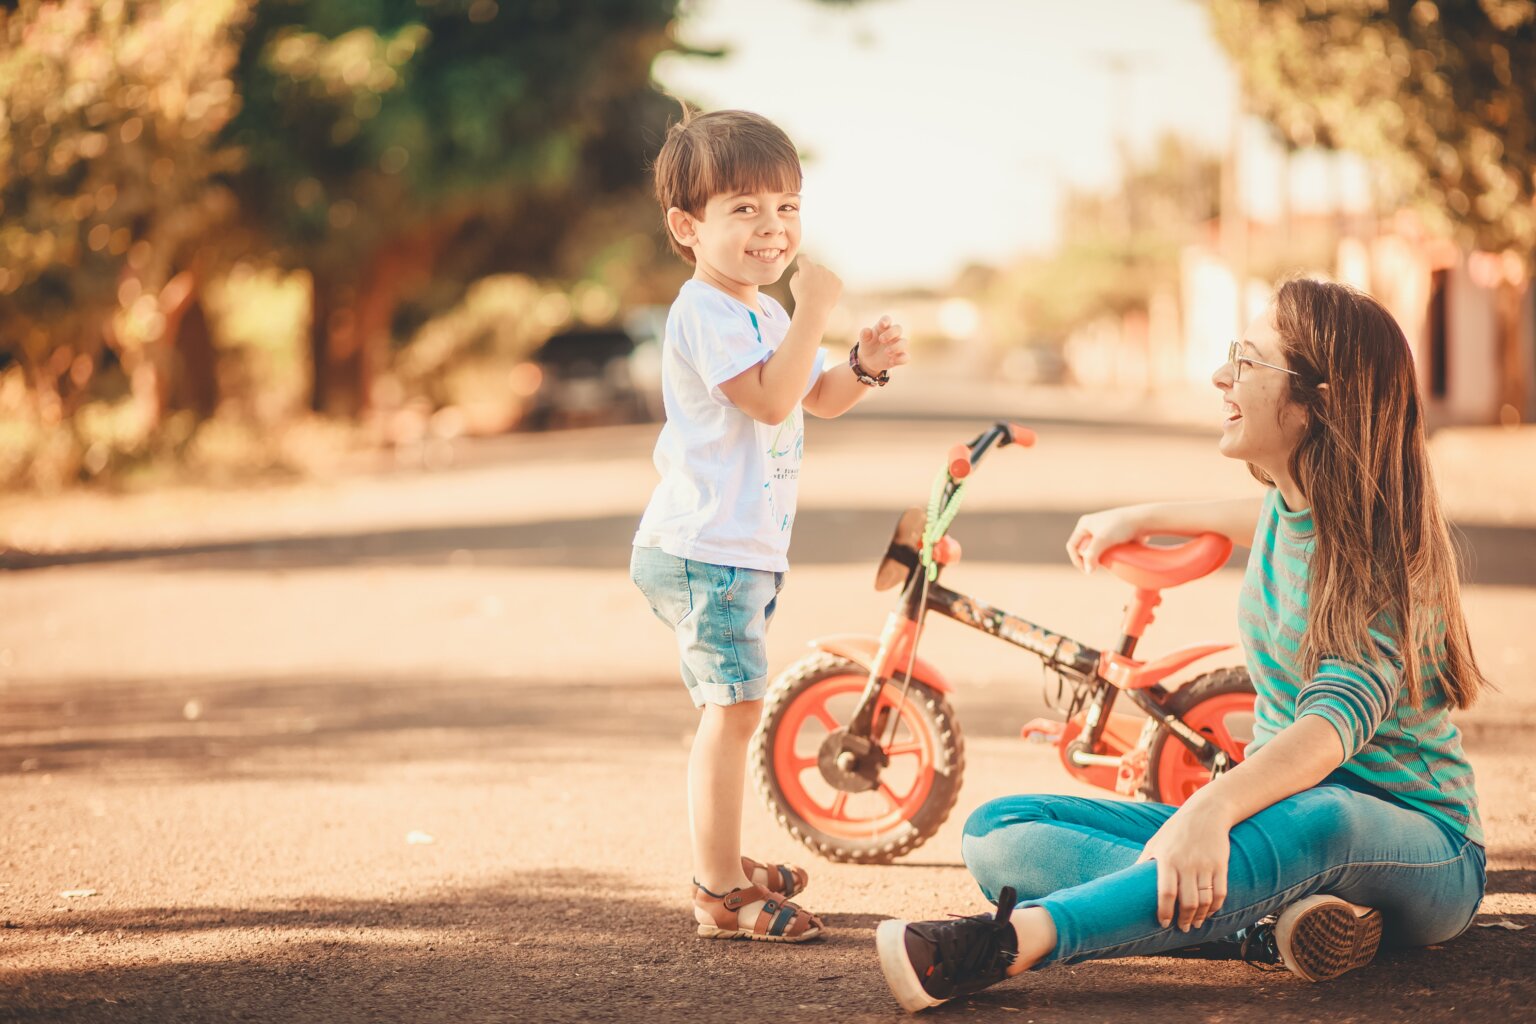 A mom and her son smiling while sitting on the ground with a bike.